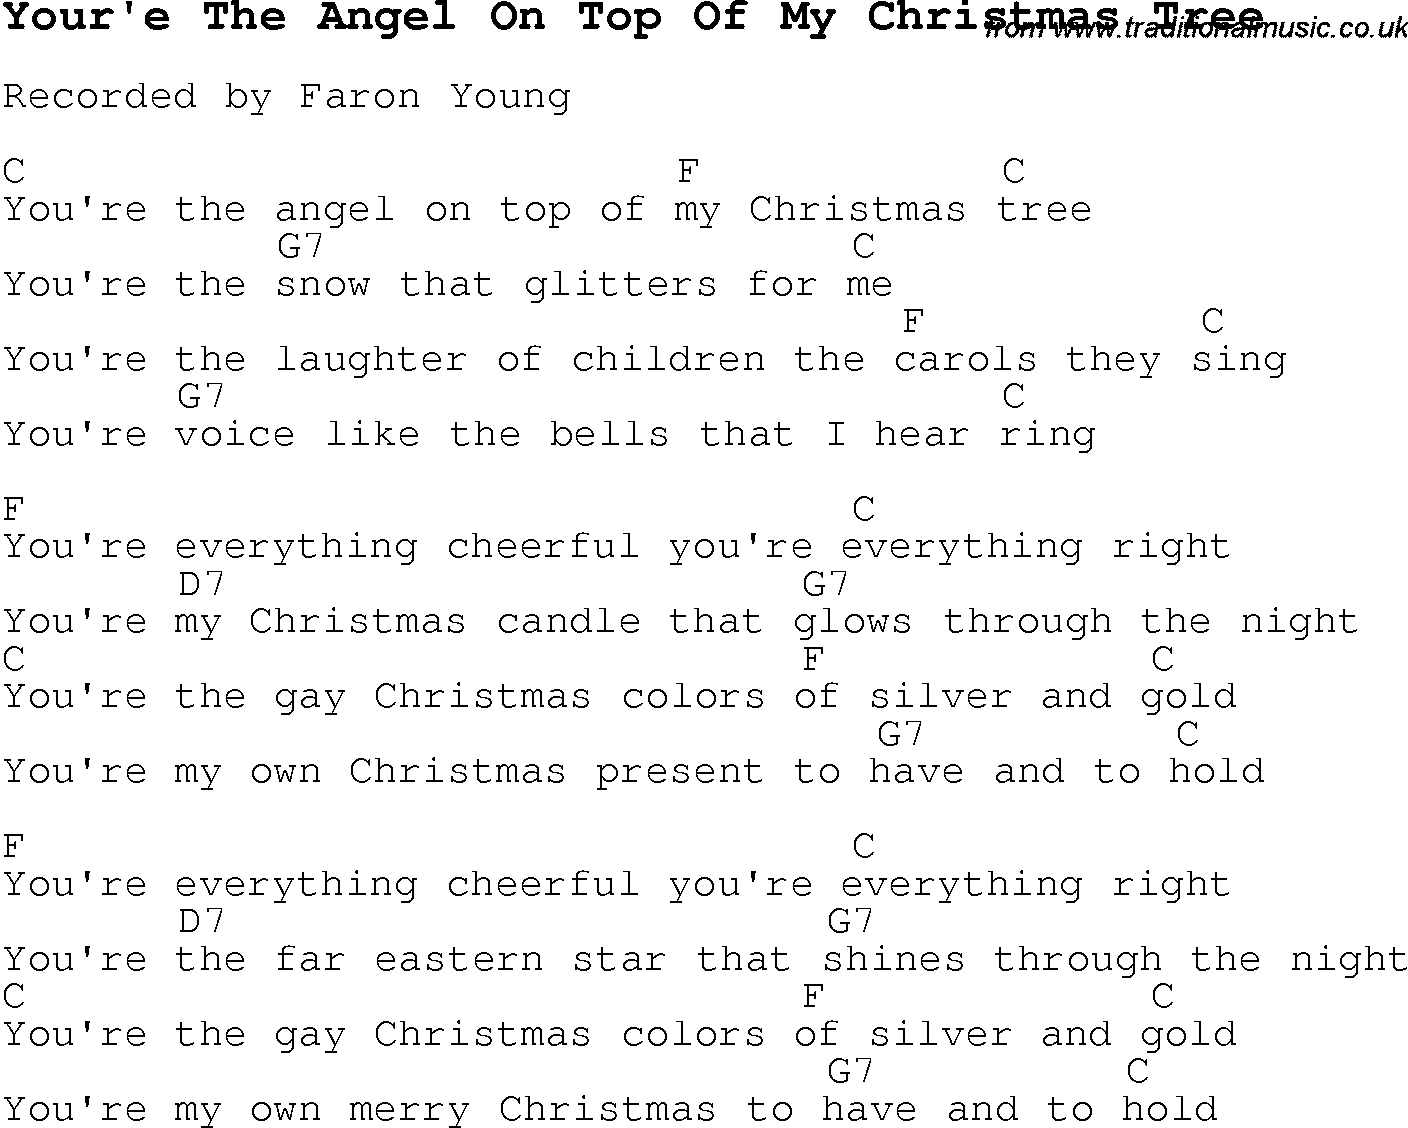 Christmas Songs and Carols, lyrics with chords for guitar banjo for Your'e The Angel On Top Of My Christmas Tree